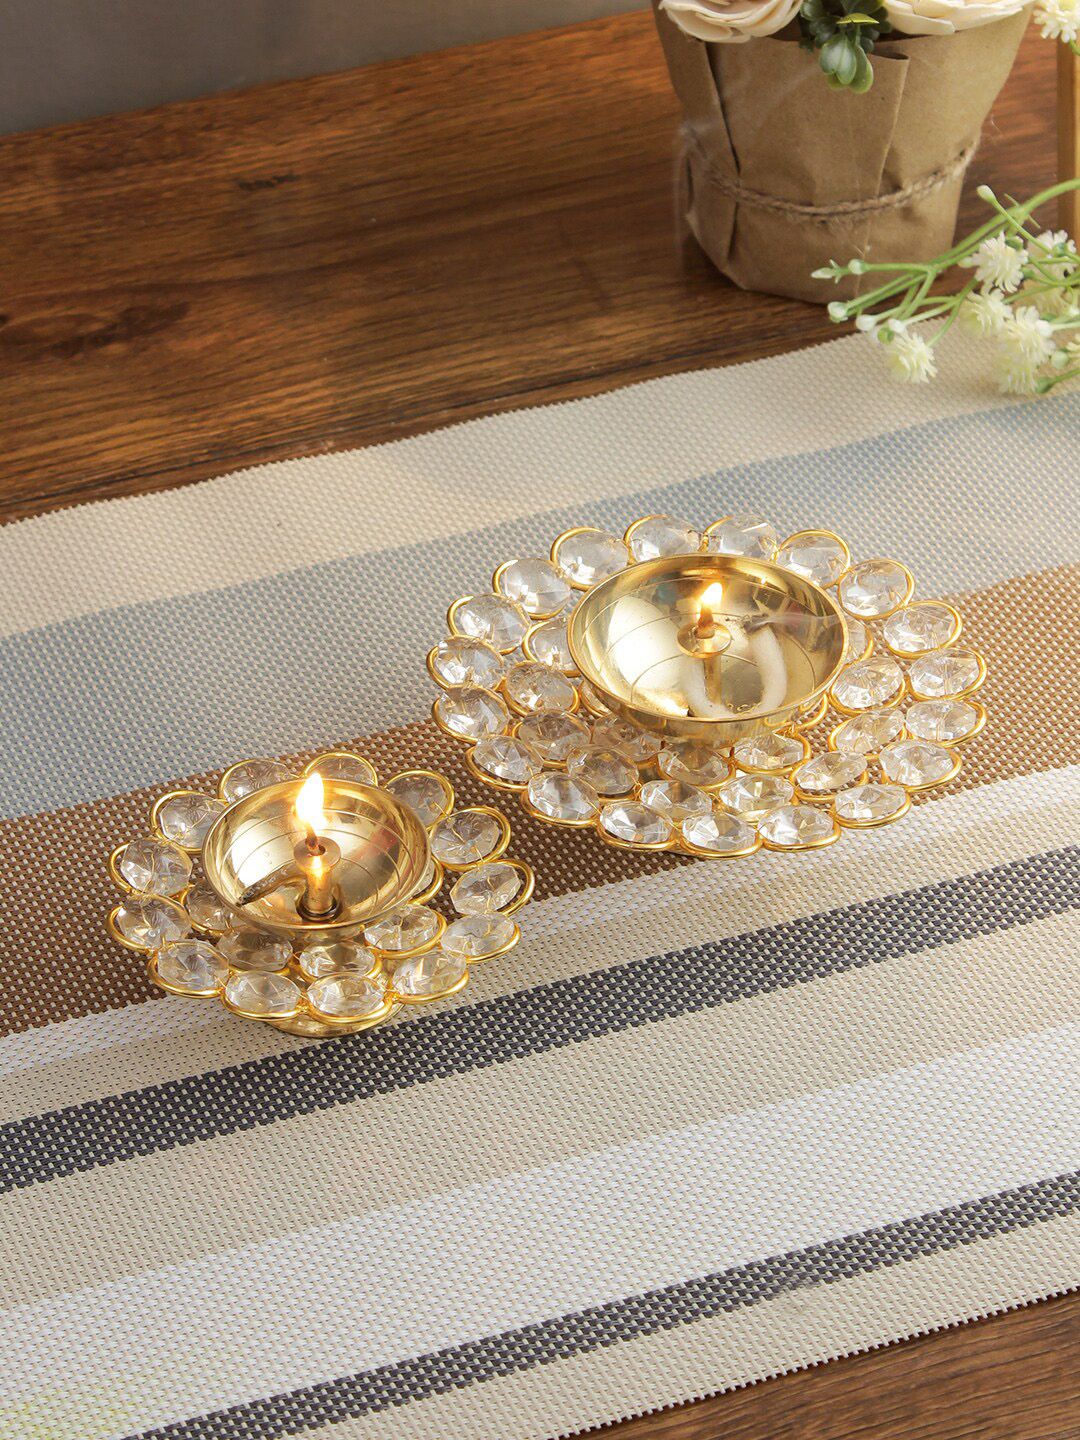 Aapno Rajasthan Set of 2 Gold & White Handcrafted Crystal Diyas Price in India